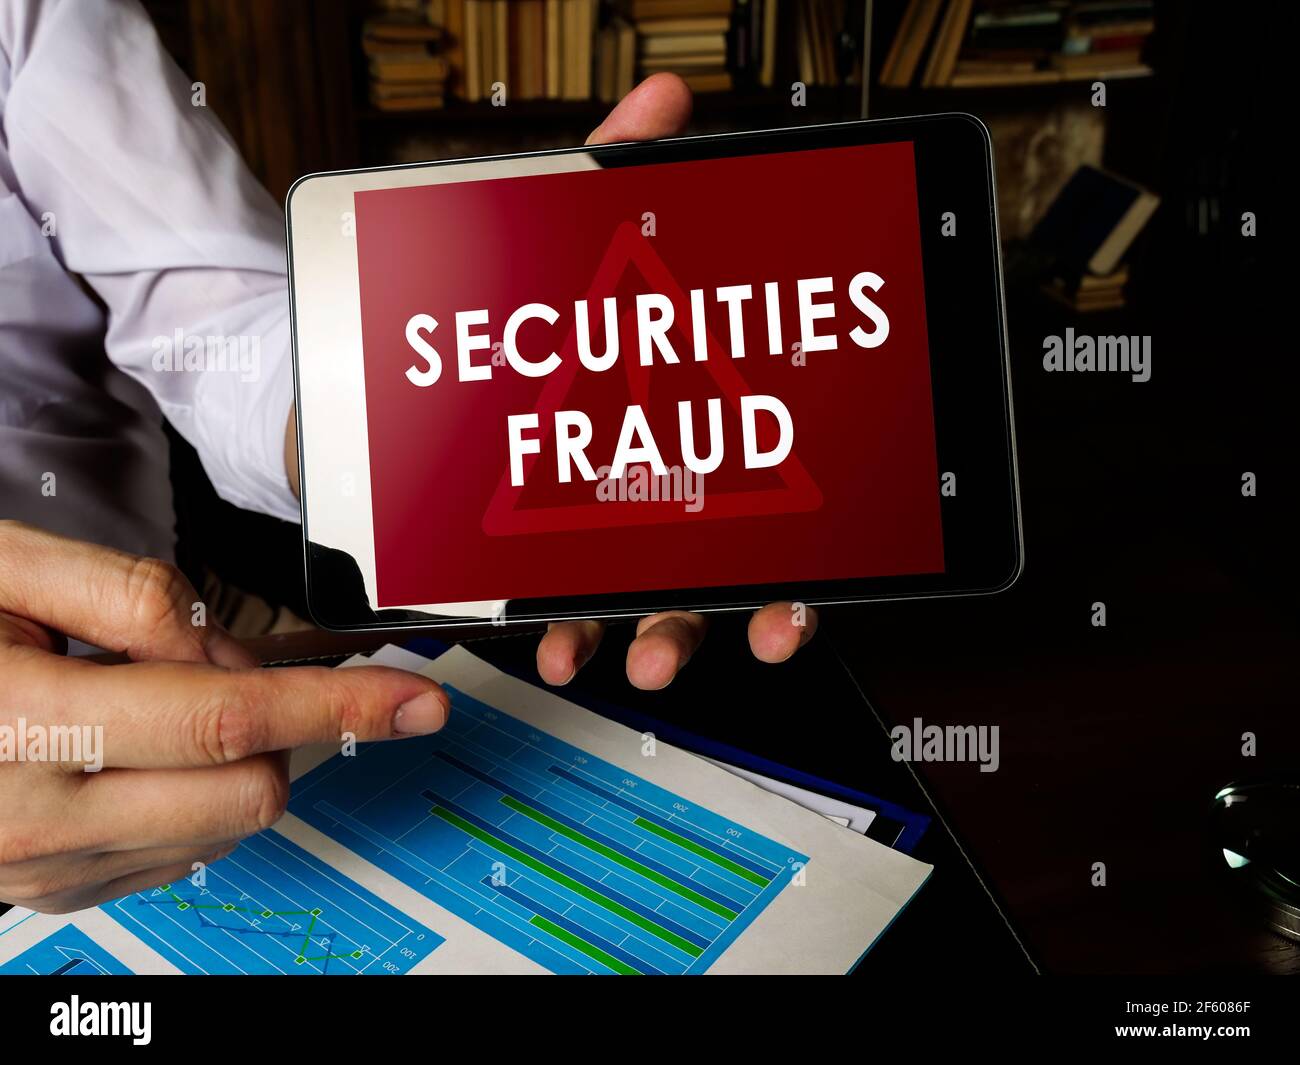 Manager shows Securities fraud alert on the tablet. Stock Photo